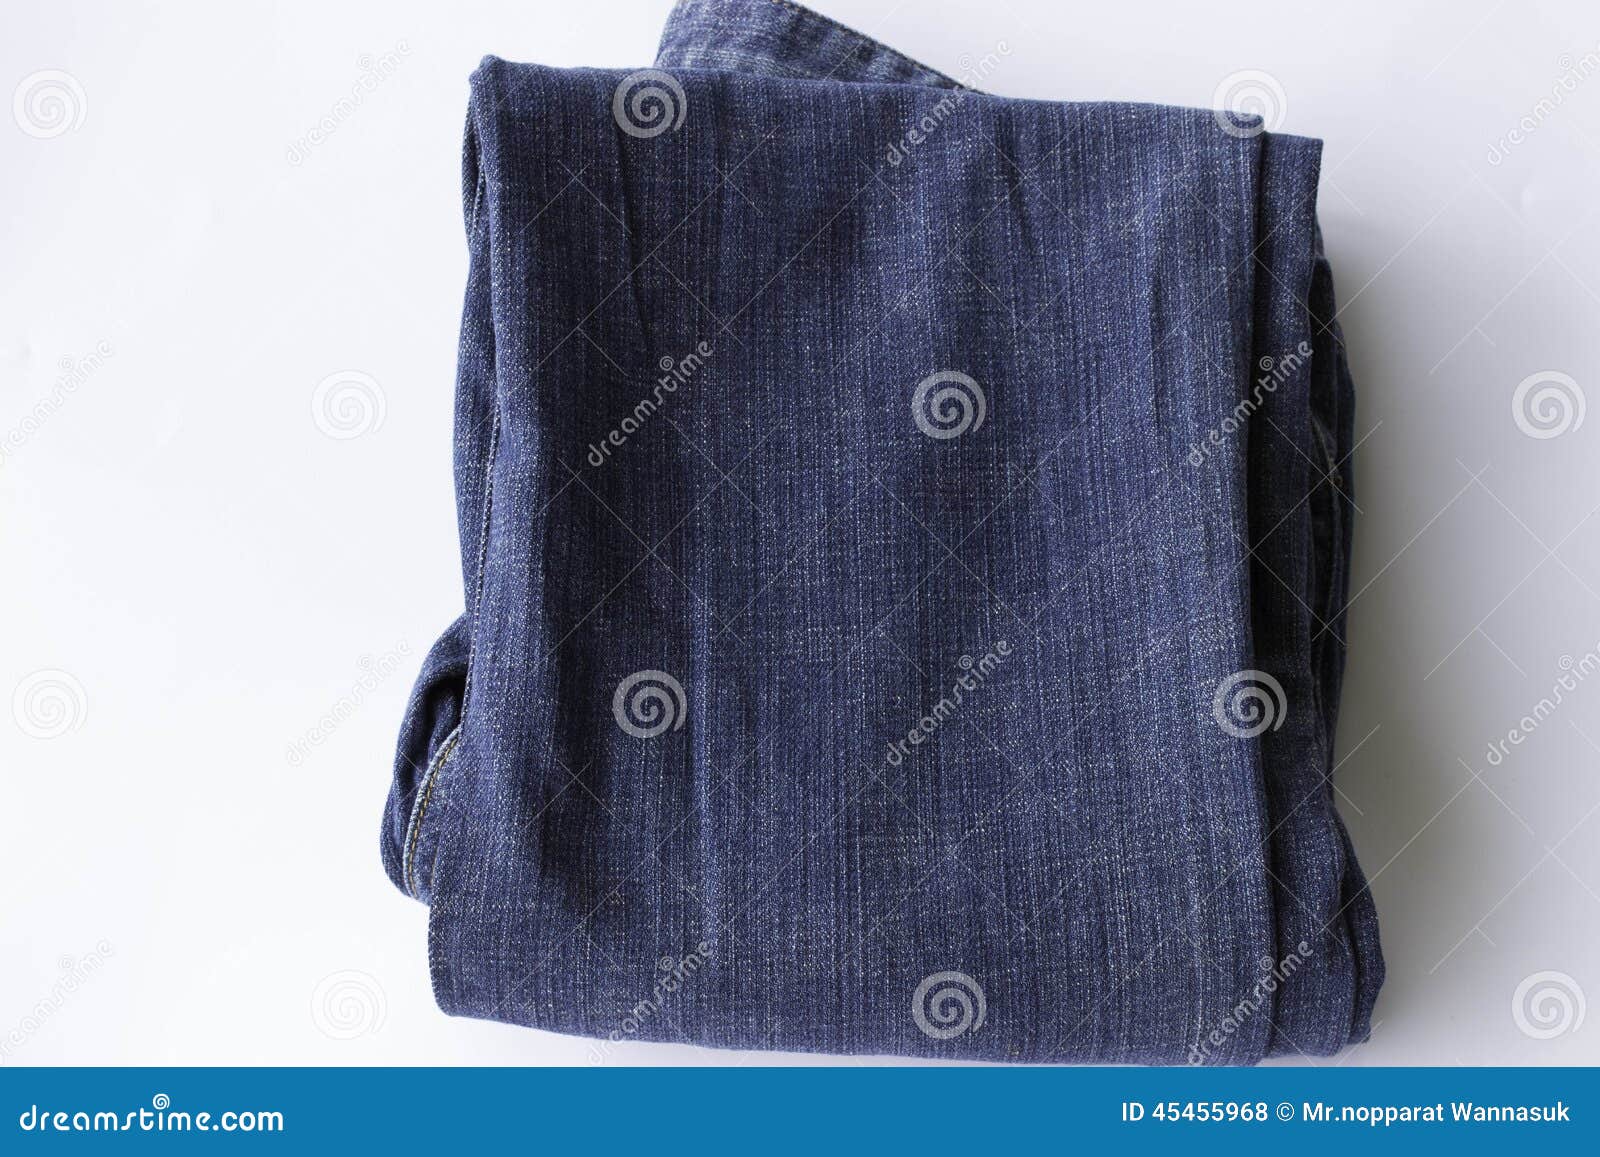 Jeans stock photo. Image of jeans, ubon, enter, search - 45455968